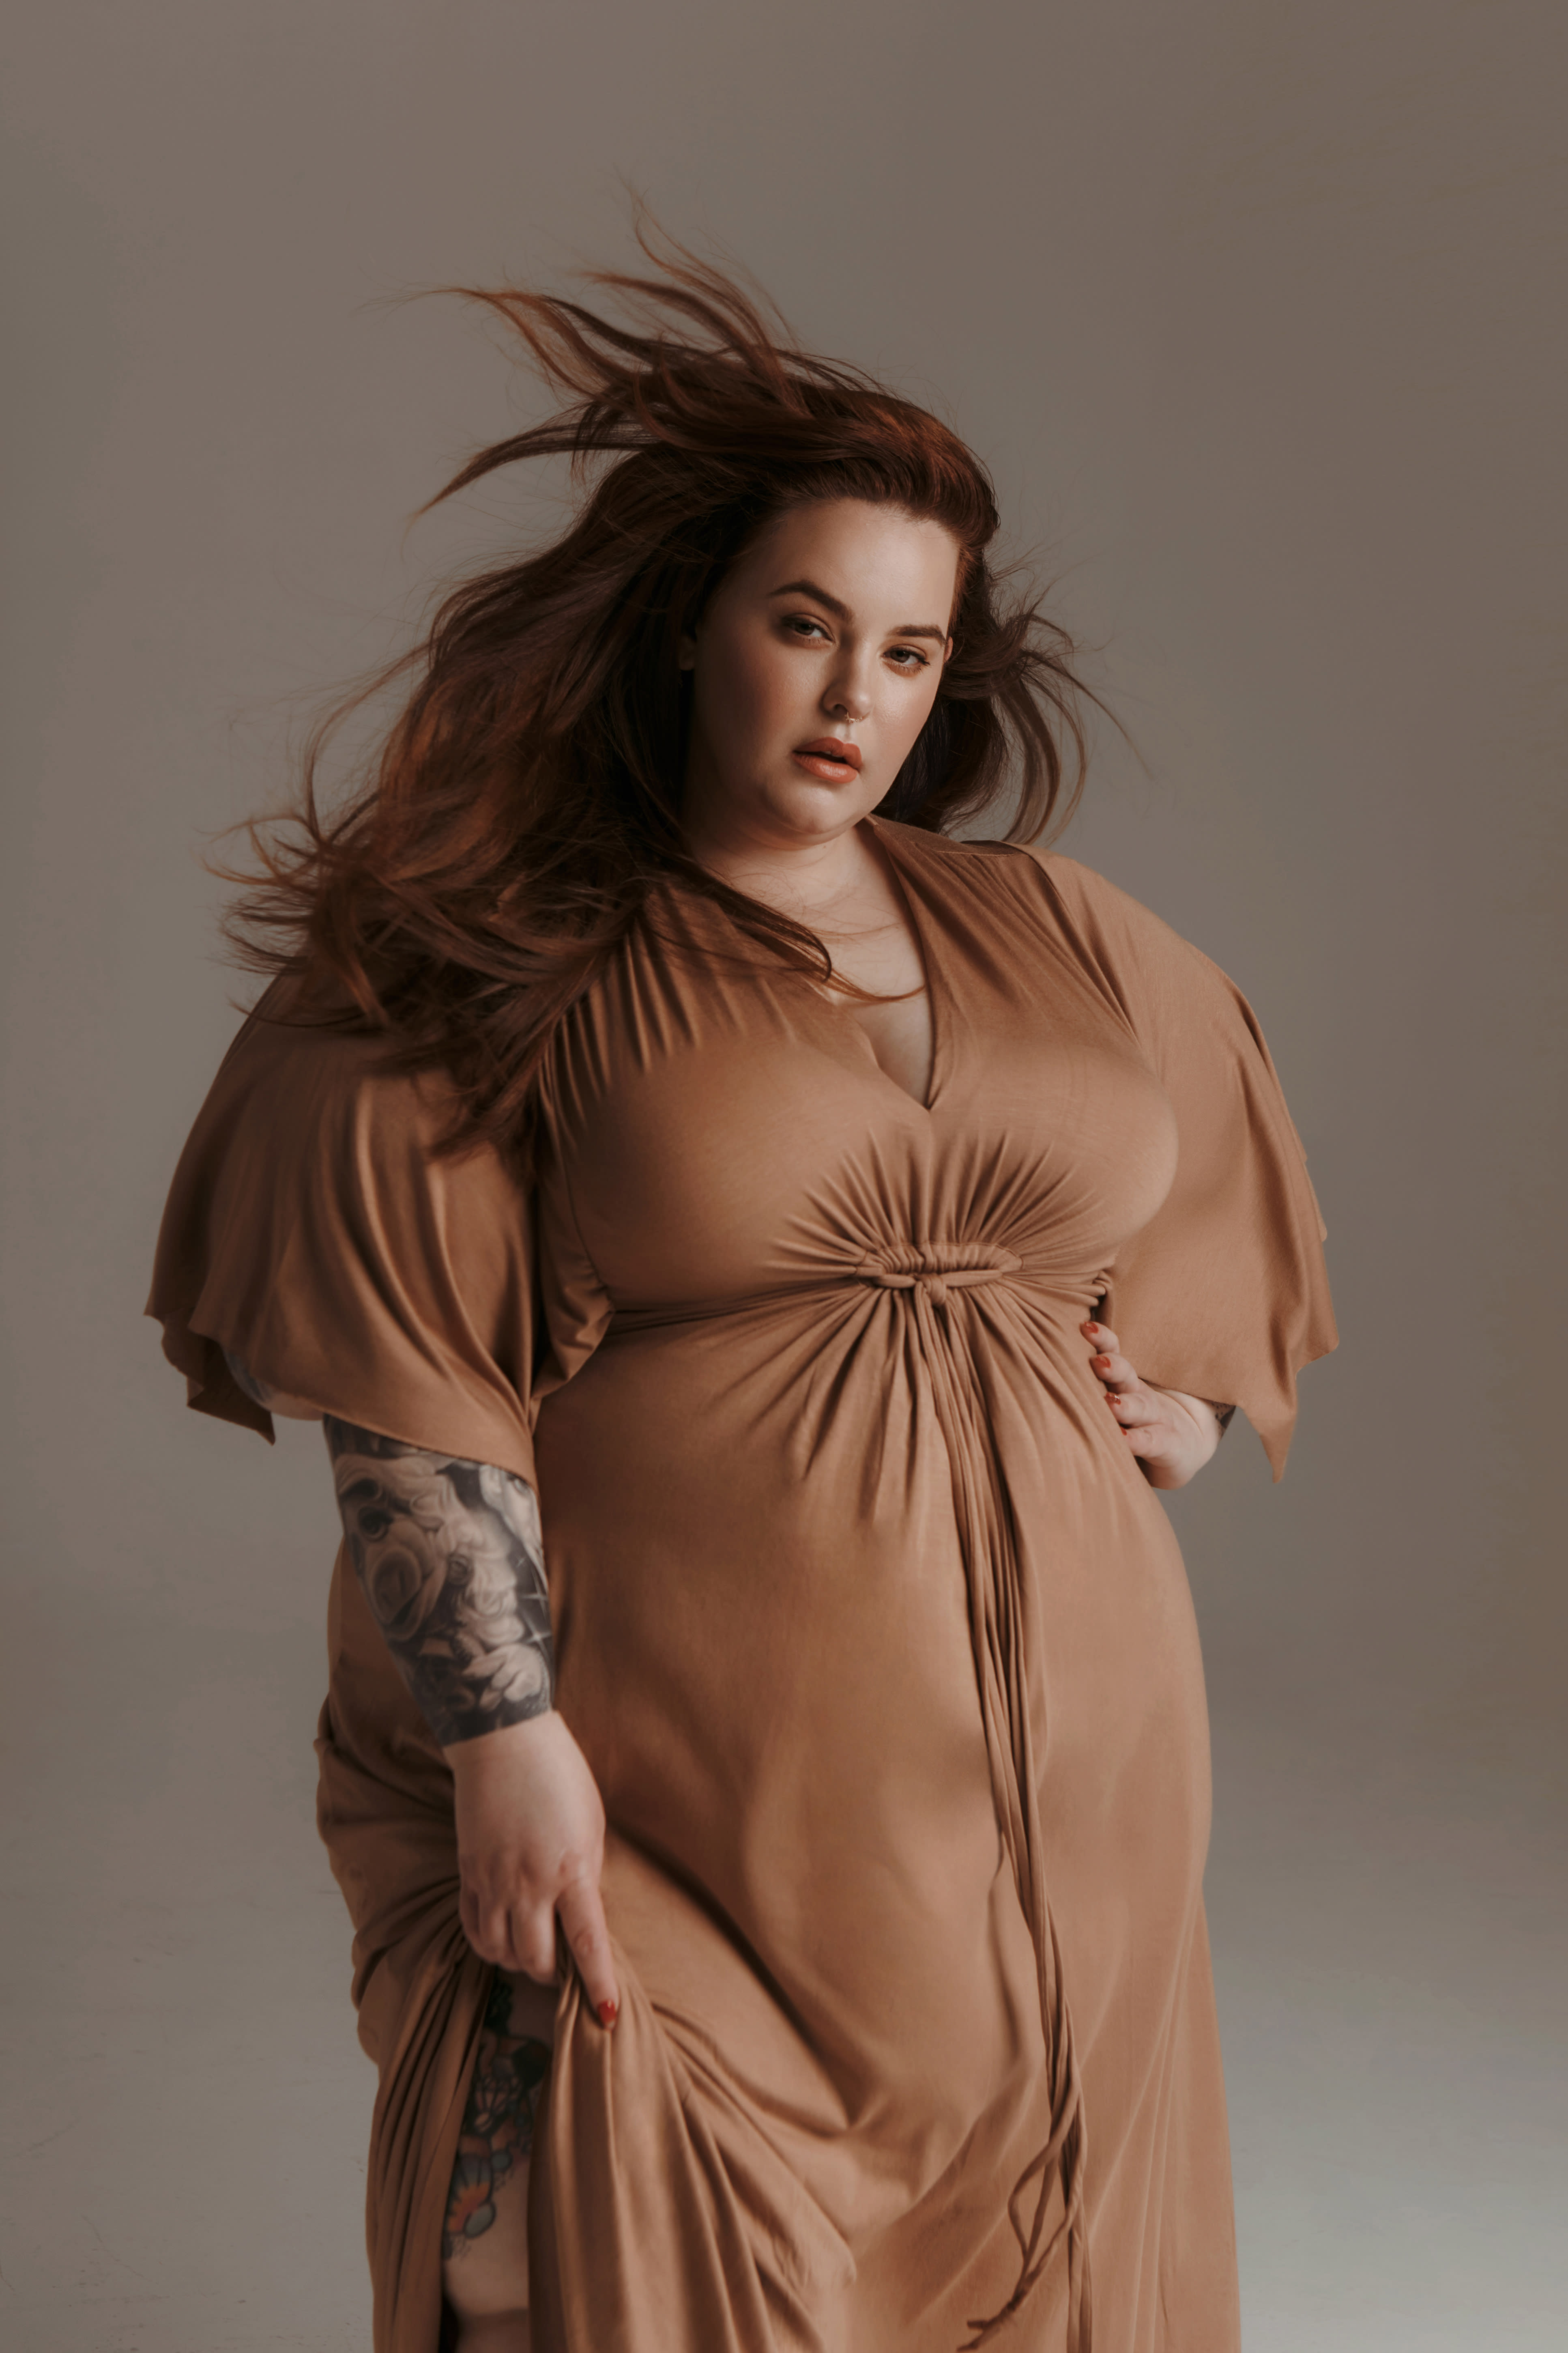 Plus Size Model Tess Holliday Strikes Co Pro Deal With Glass 9620